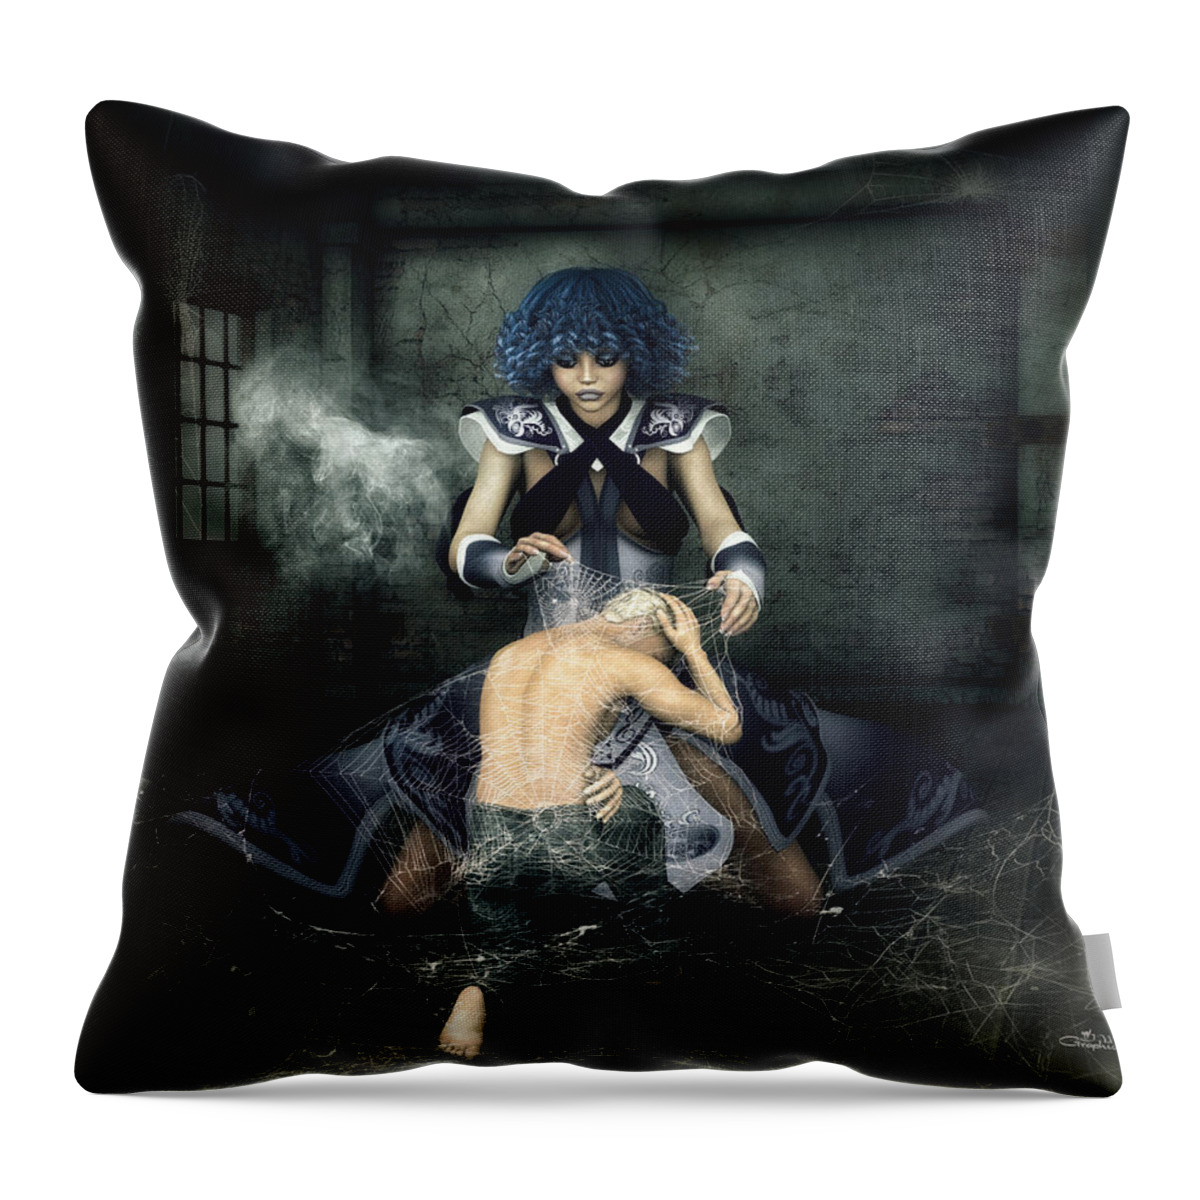 3d Throw Pillow featuring the digital art Cocooned by Jutta Maria Pusl